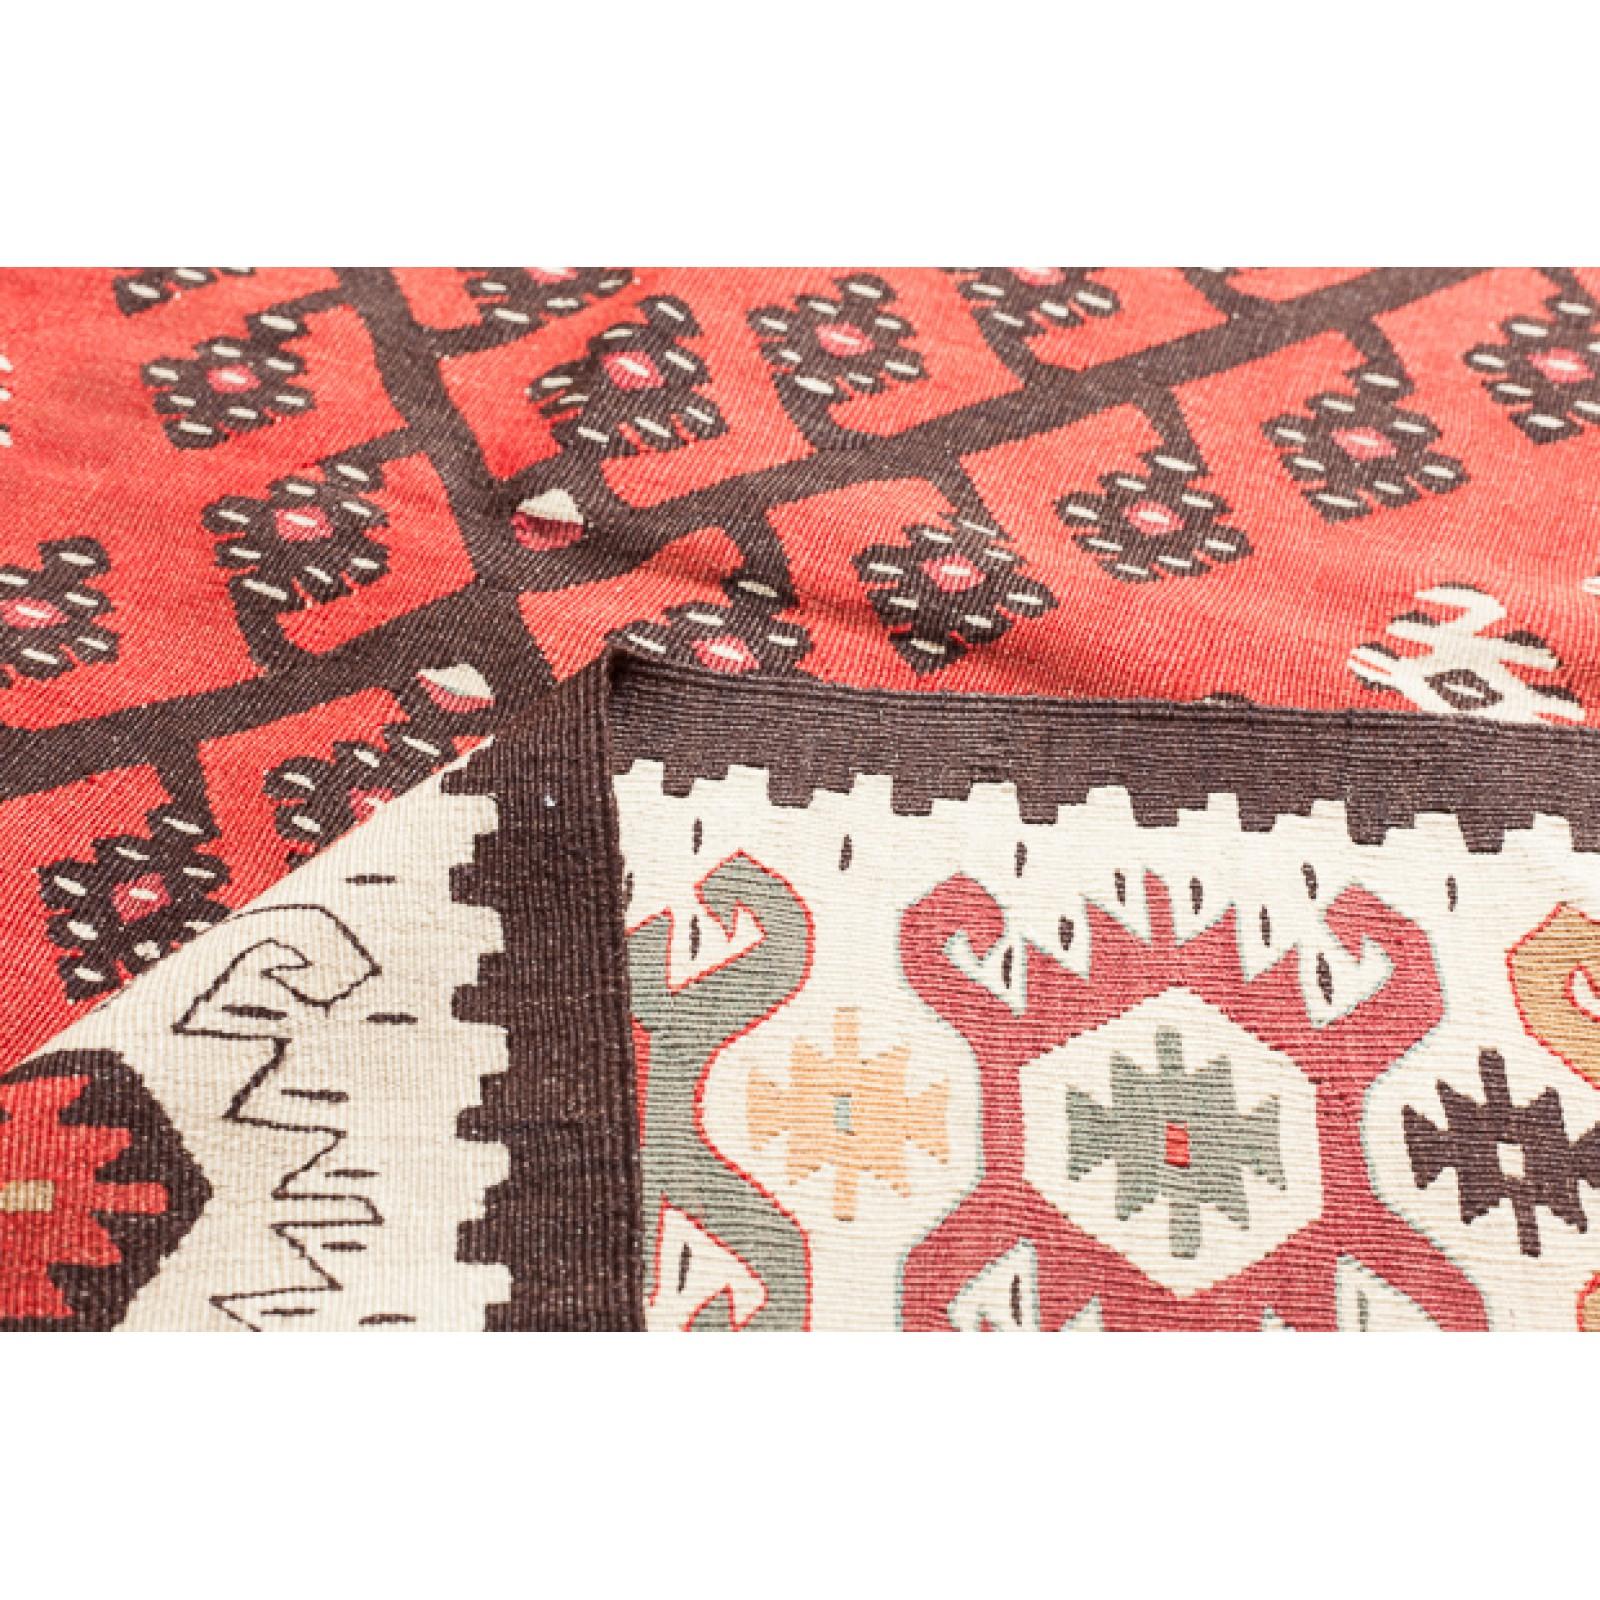 This is a vintage Unique Sarkoy (Sharkoy or Sarköy) Kilim rug from Western Turkey with a rare and beautiful color composition.

Sarkoy kilims are very finely woven in slitweave in a variety of sizes and are made in one piece. Many feature the tree